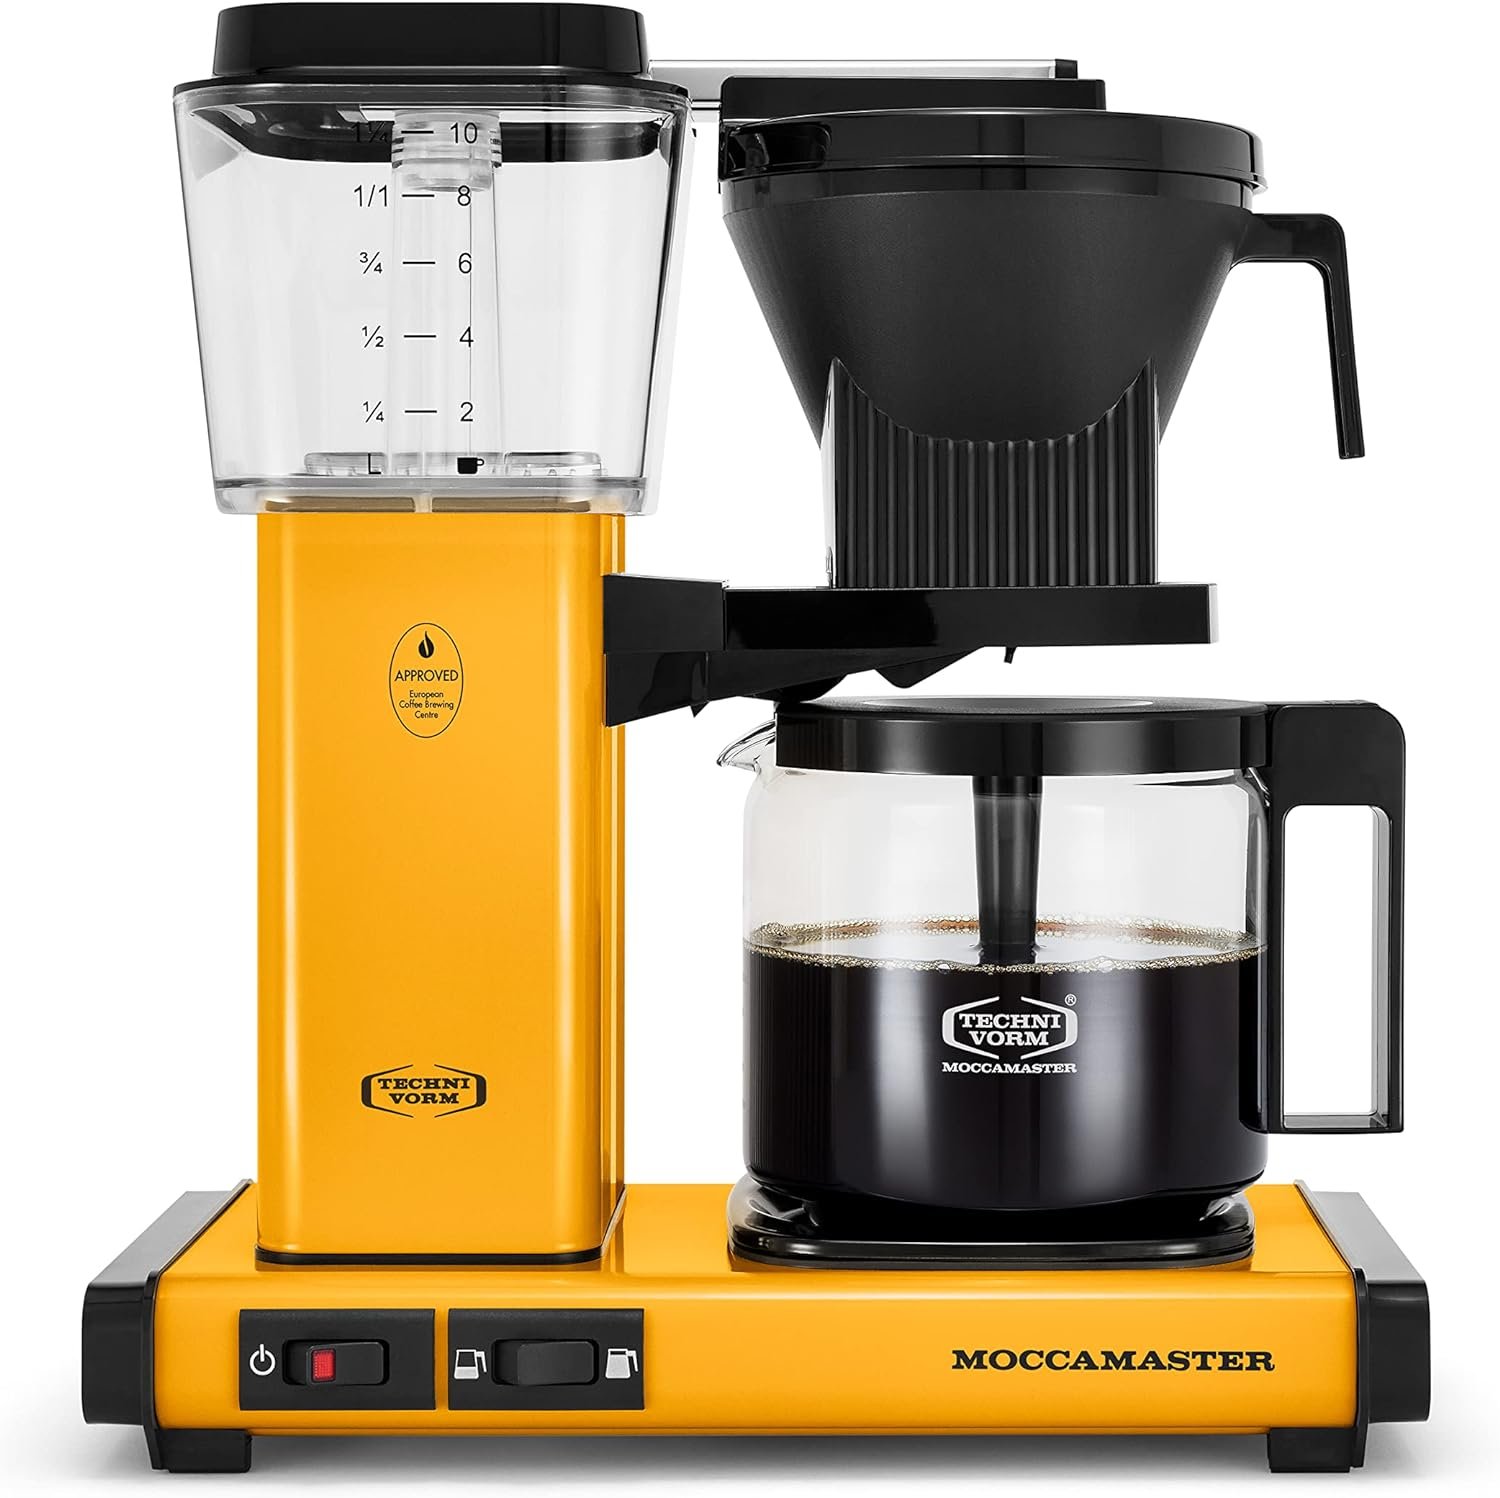 Technivorm Moccamaster 53942 KBGV 10-Cup Coffee Maker Yellow Pepper, 40 Ounce, 1.25l